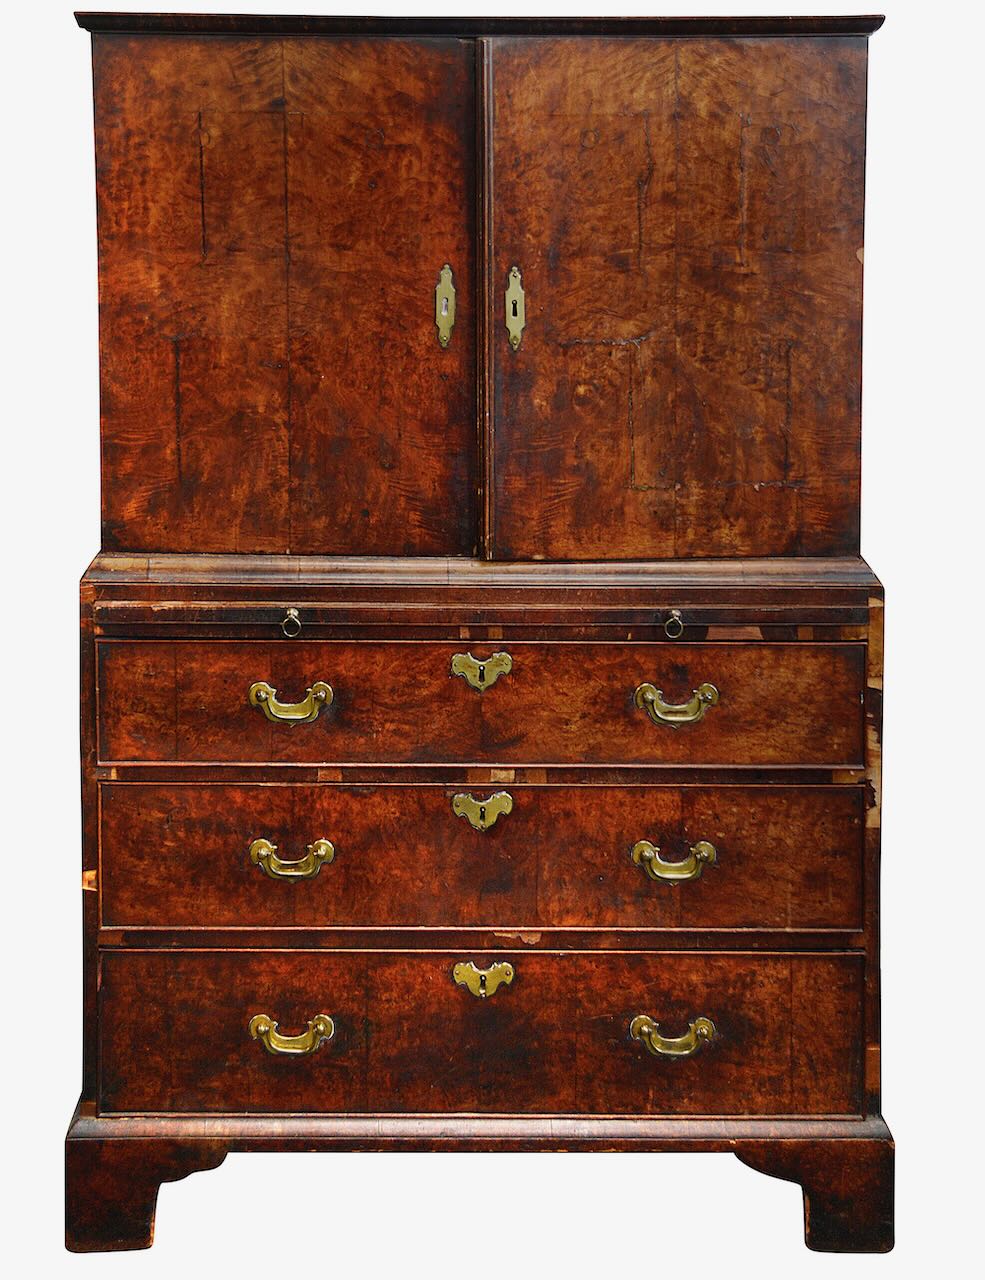 A George I burr walnut cabinet on chest